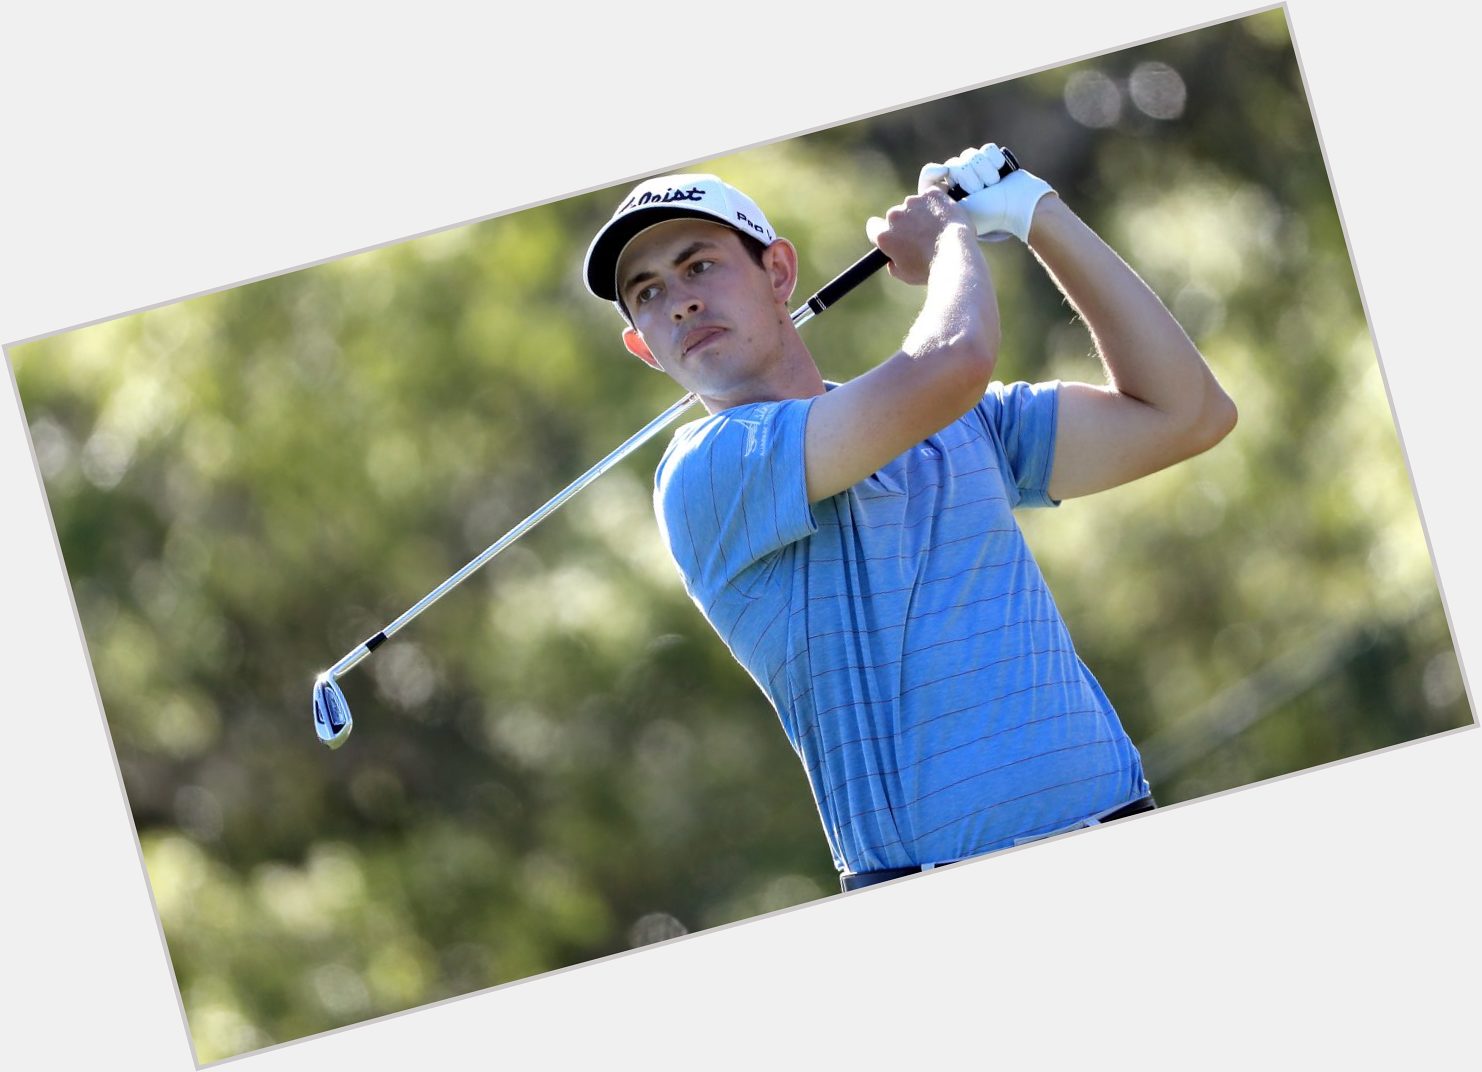 Http://fanpagepress.net/m/P/Patrick Cantlay Dating 2